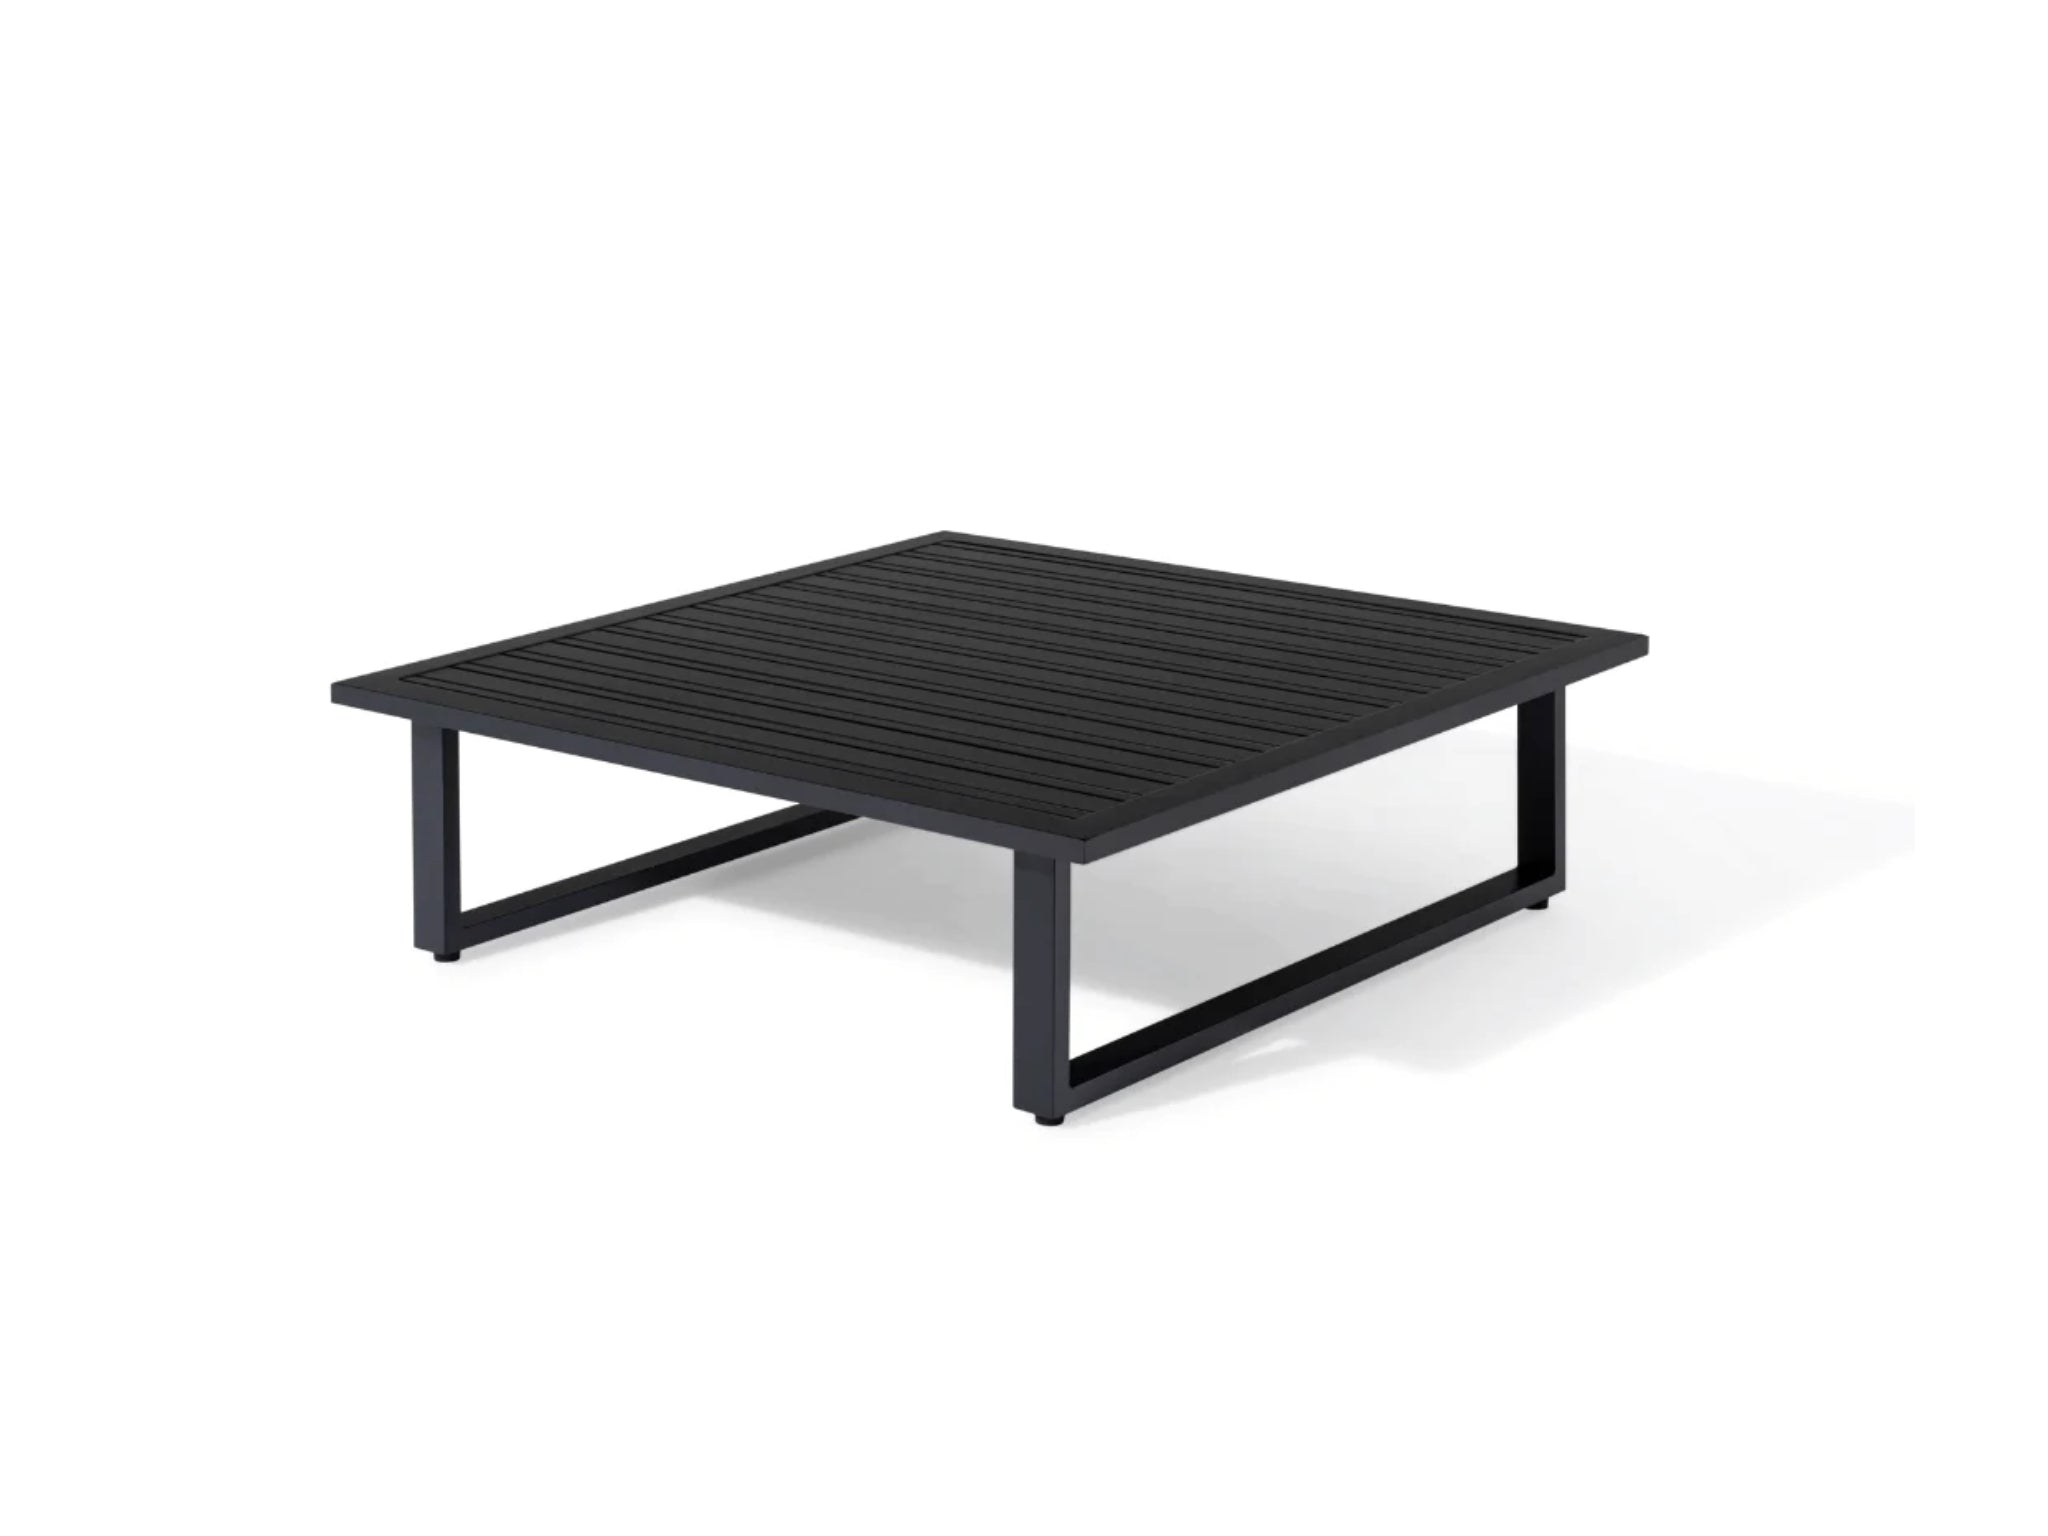 SIMPO by Sunlongarden Ethos Coffee Table